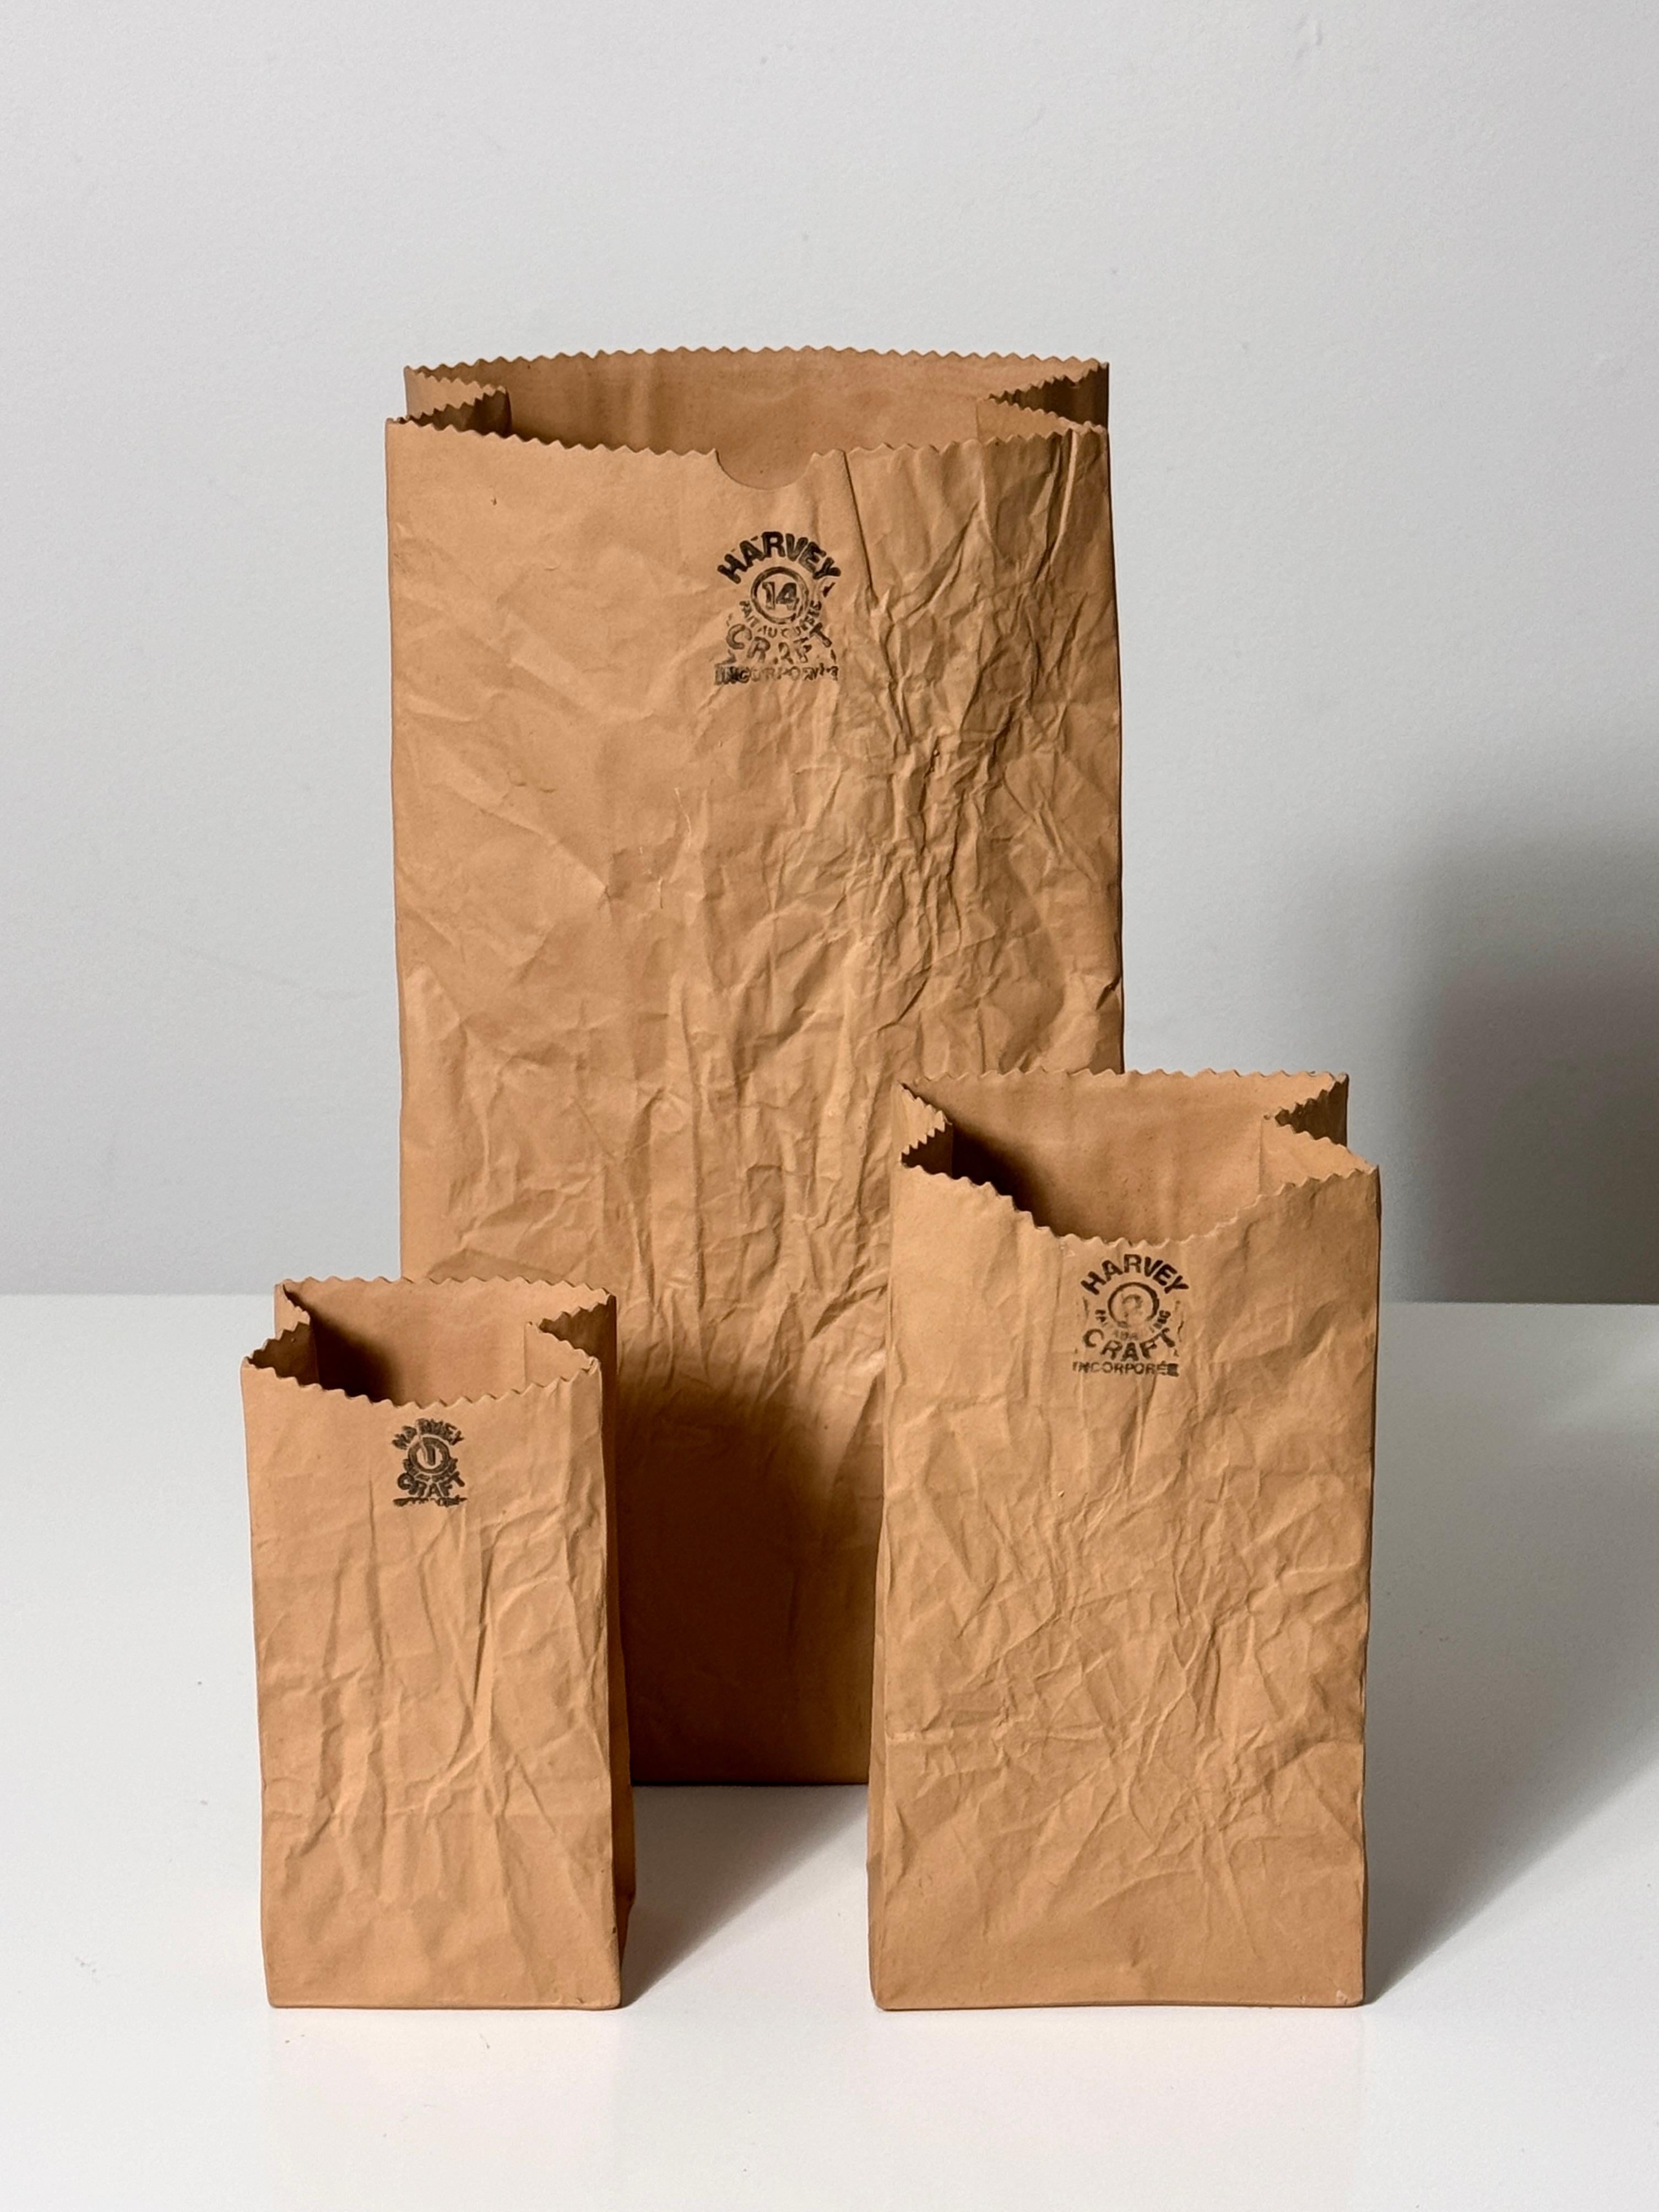 Set of 3 crinkled ceramic paper bag vases designed by Michael Harvey  for Harvey Craft circa 1970s
Unique pop art sculptural pieces with incredible detail
Rare set of all three sizes

sm     3 x 2 x 6